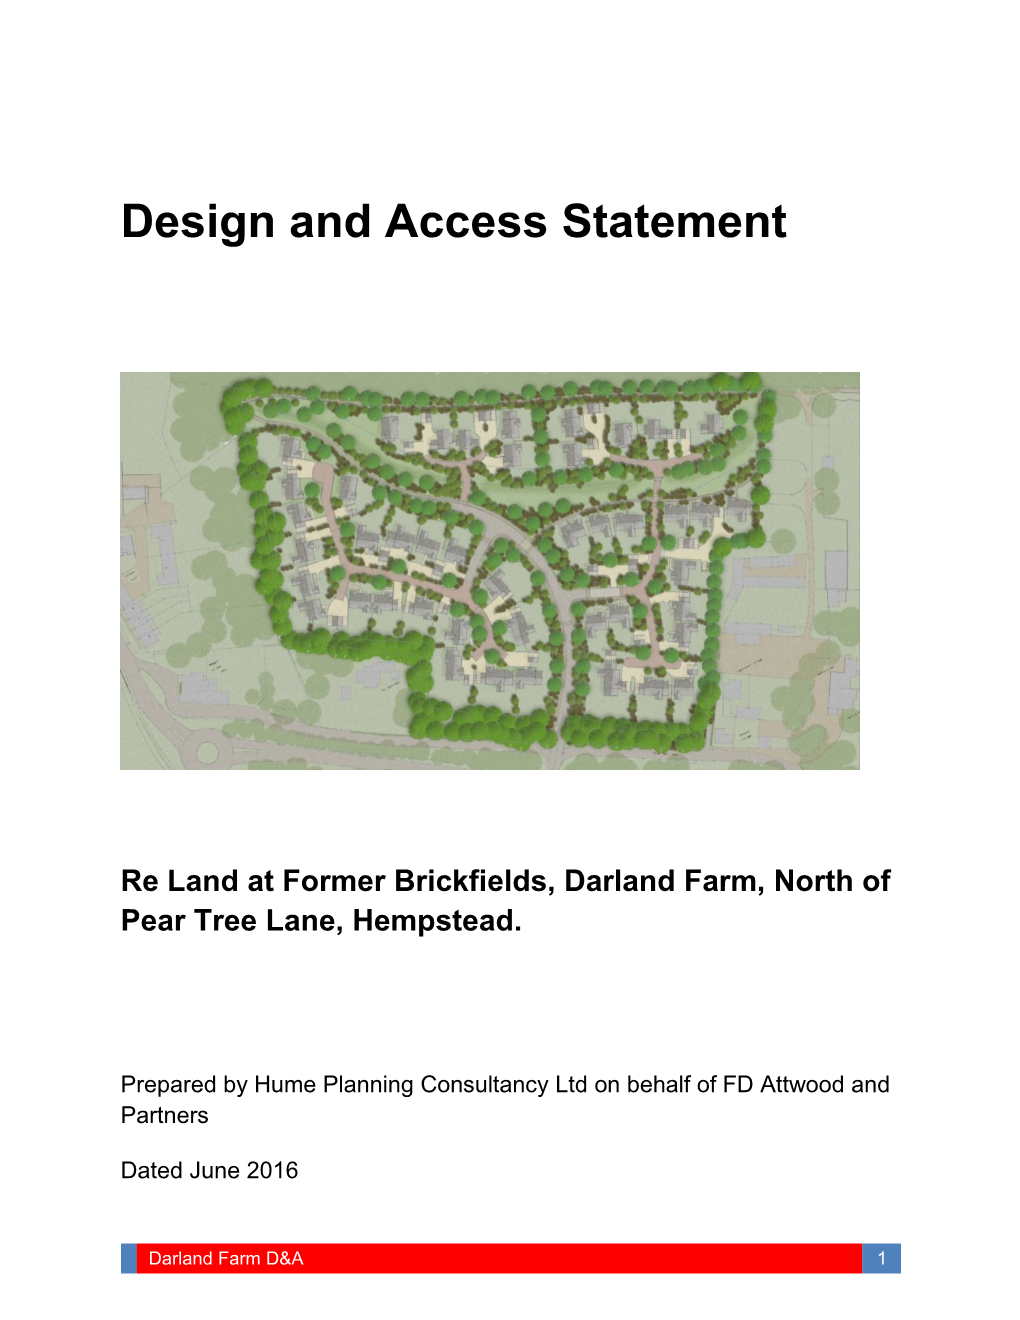 Design and Access Statement Re Land At